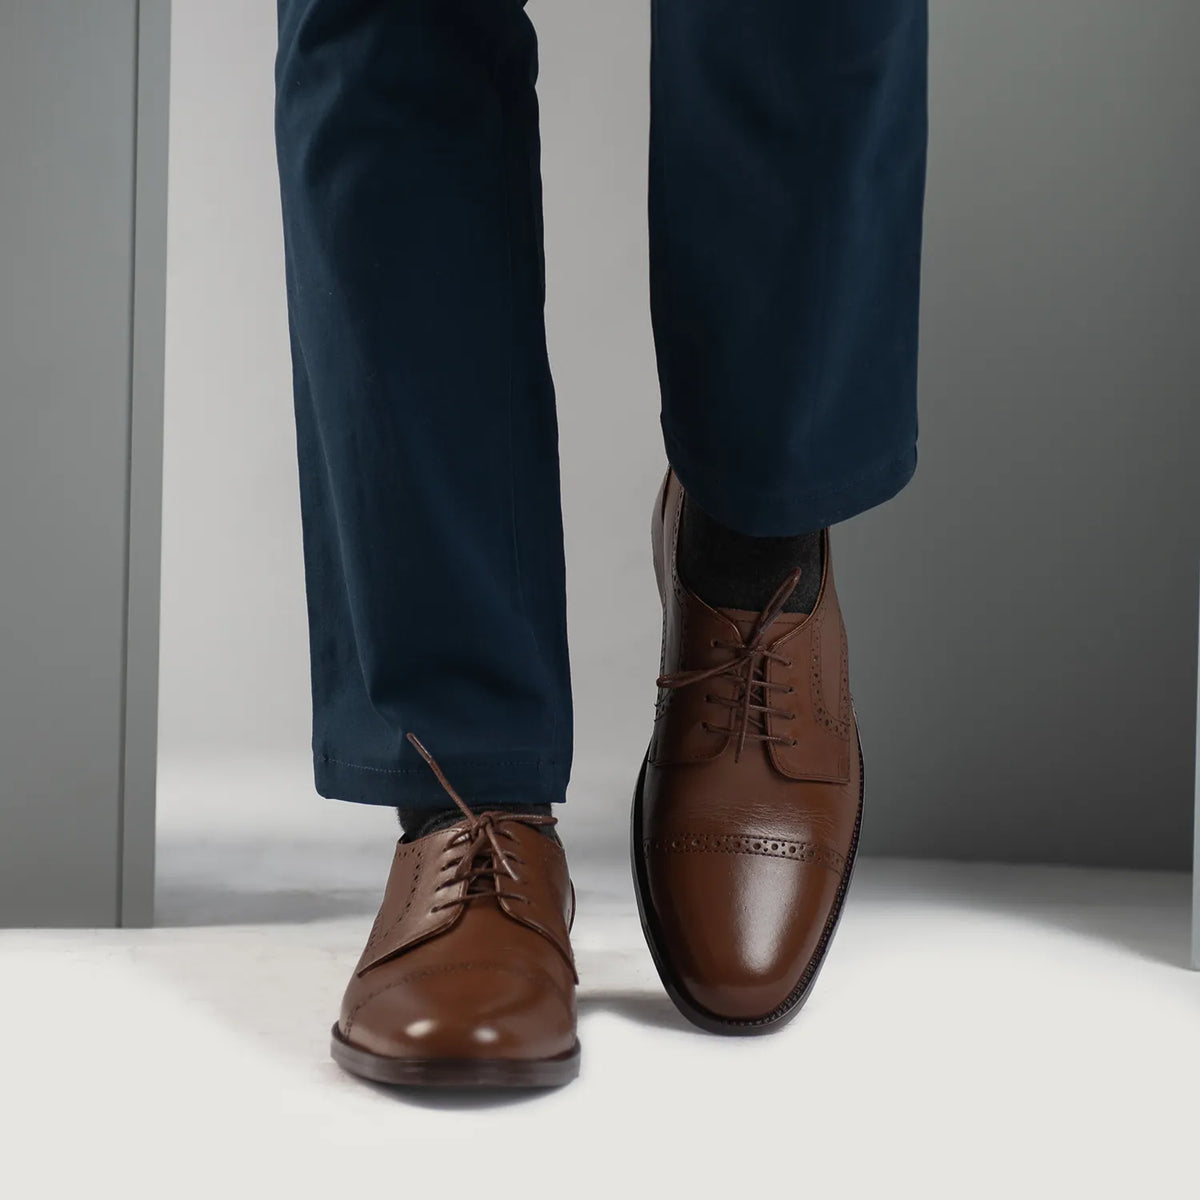 Dirk Brogues Derby Brown Leather Shoes